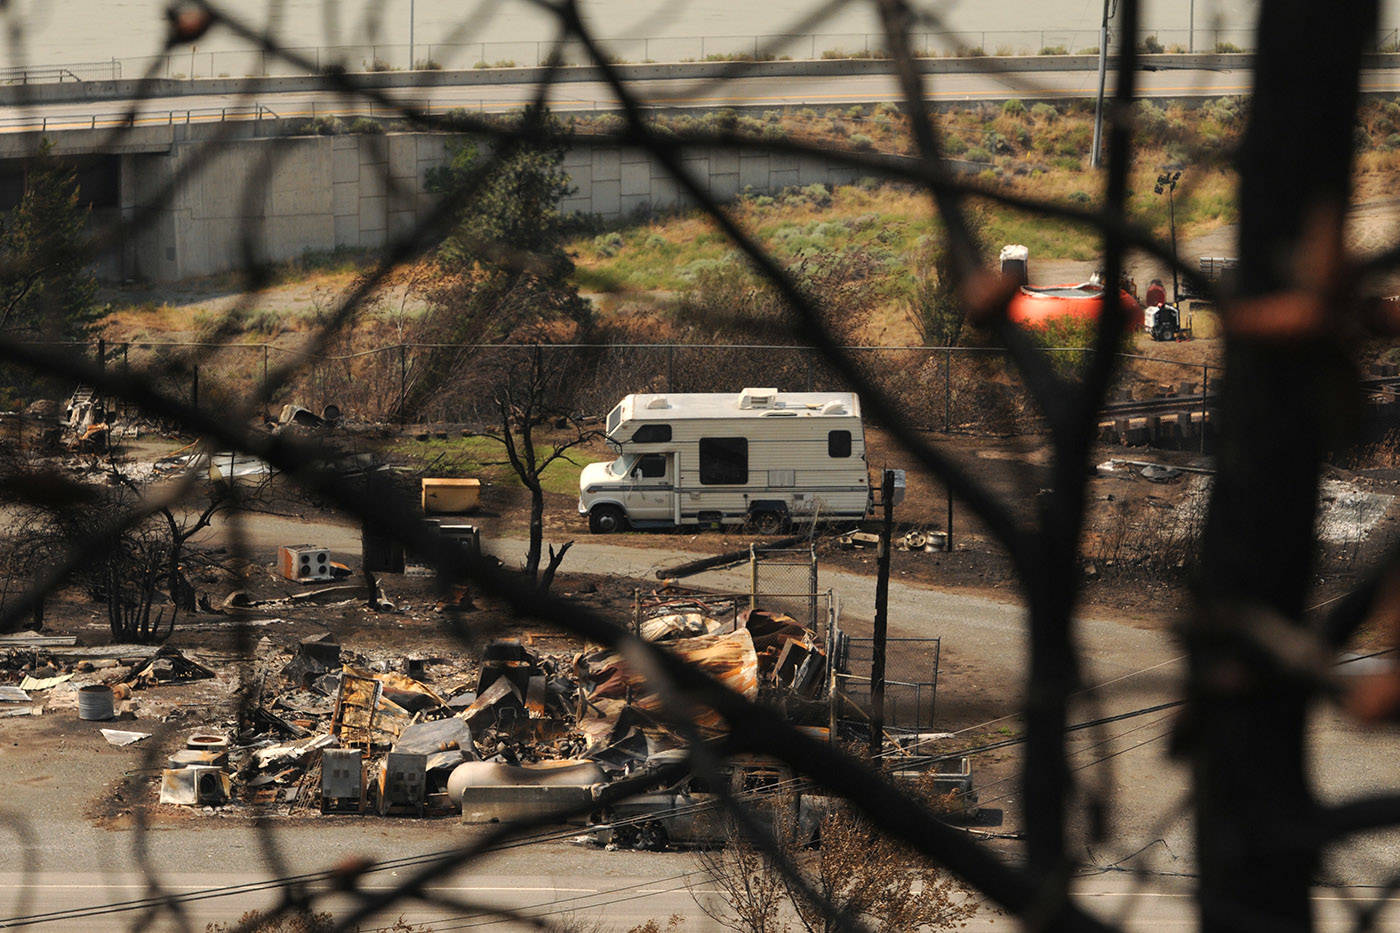 A motorhome sits amid the burnt debris in the Village of Lytton, B.C. on Friday, July 9, 2021 following a massive wildfire that tore through the town destroying 90 per cent of it. (Jenna Hauck/ Black Press Media)